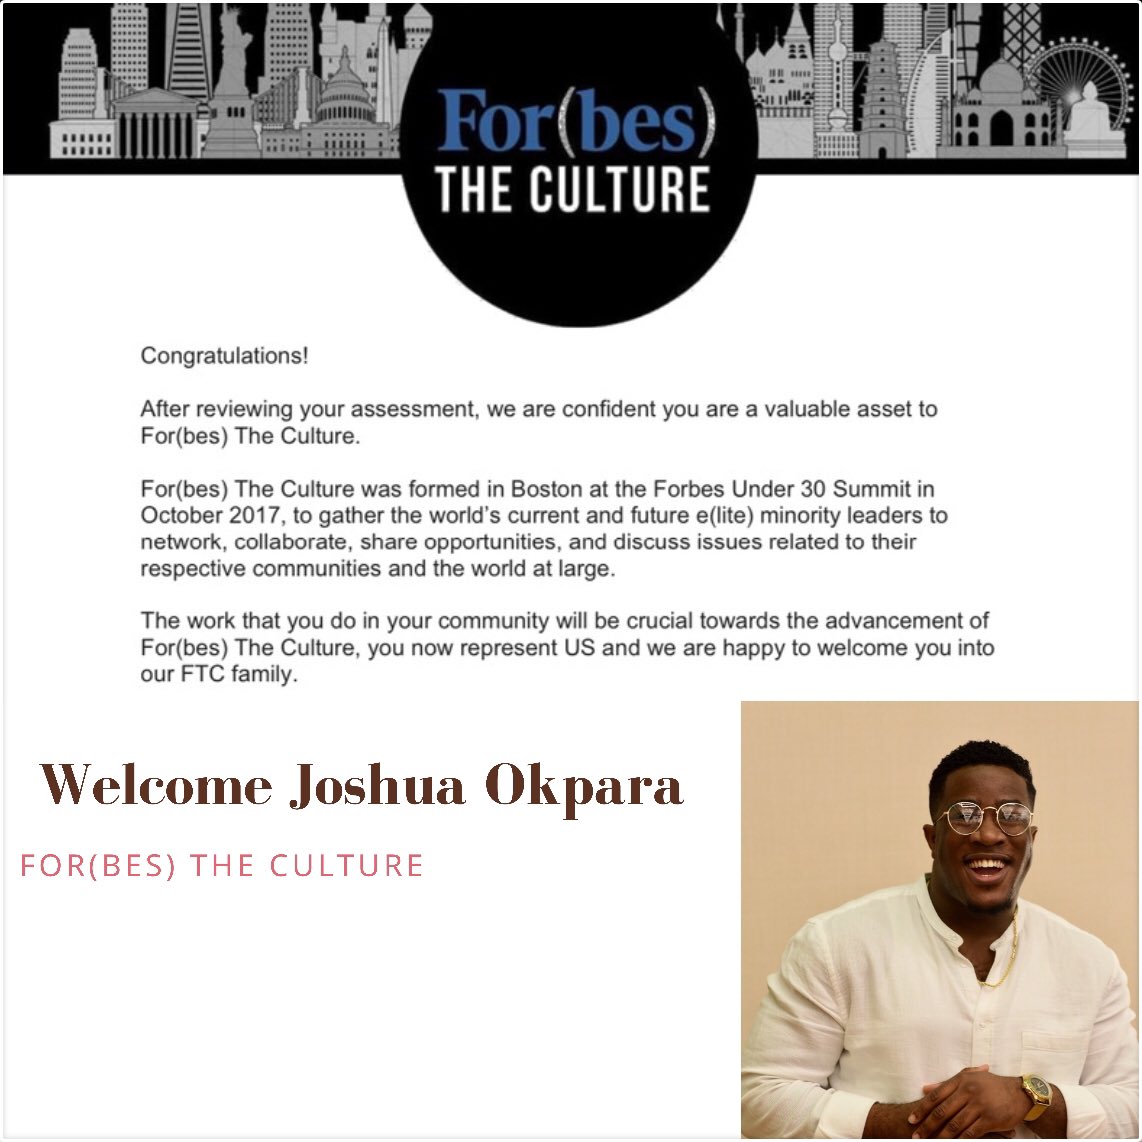 Super excited and honored to be a part of For(bes) the culture. Looking forward to grow, develop and finish what God has set me out to do on earth. To God be the glory! 
#Forbes #under30 #forbestheculture